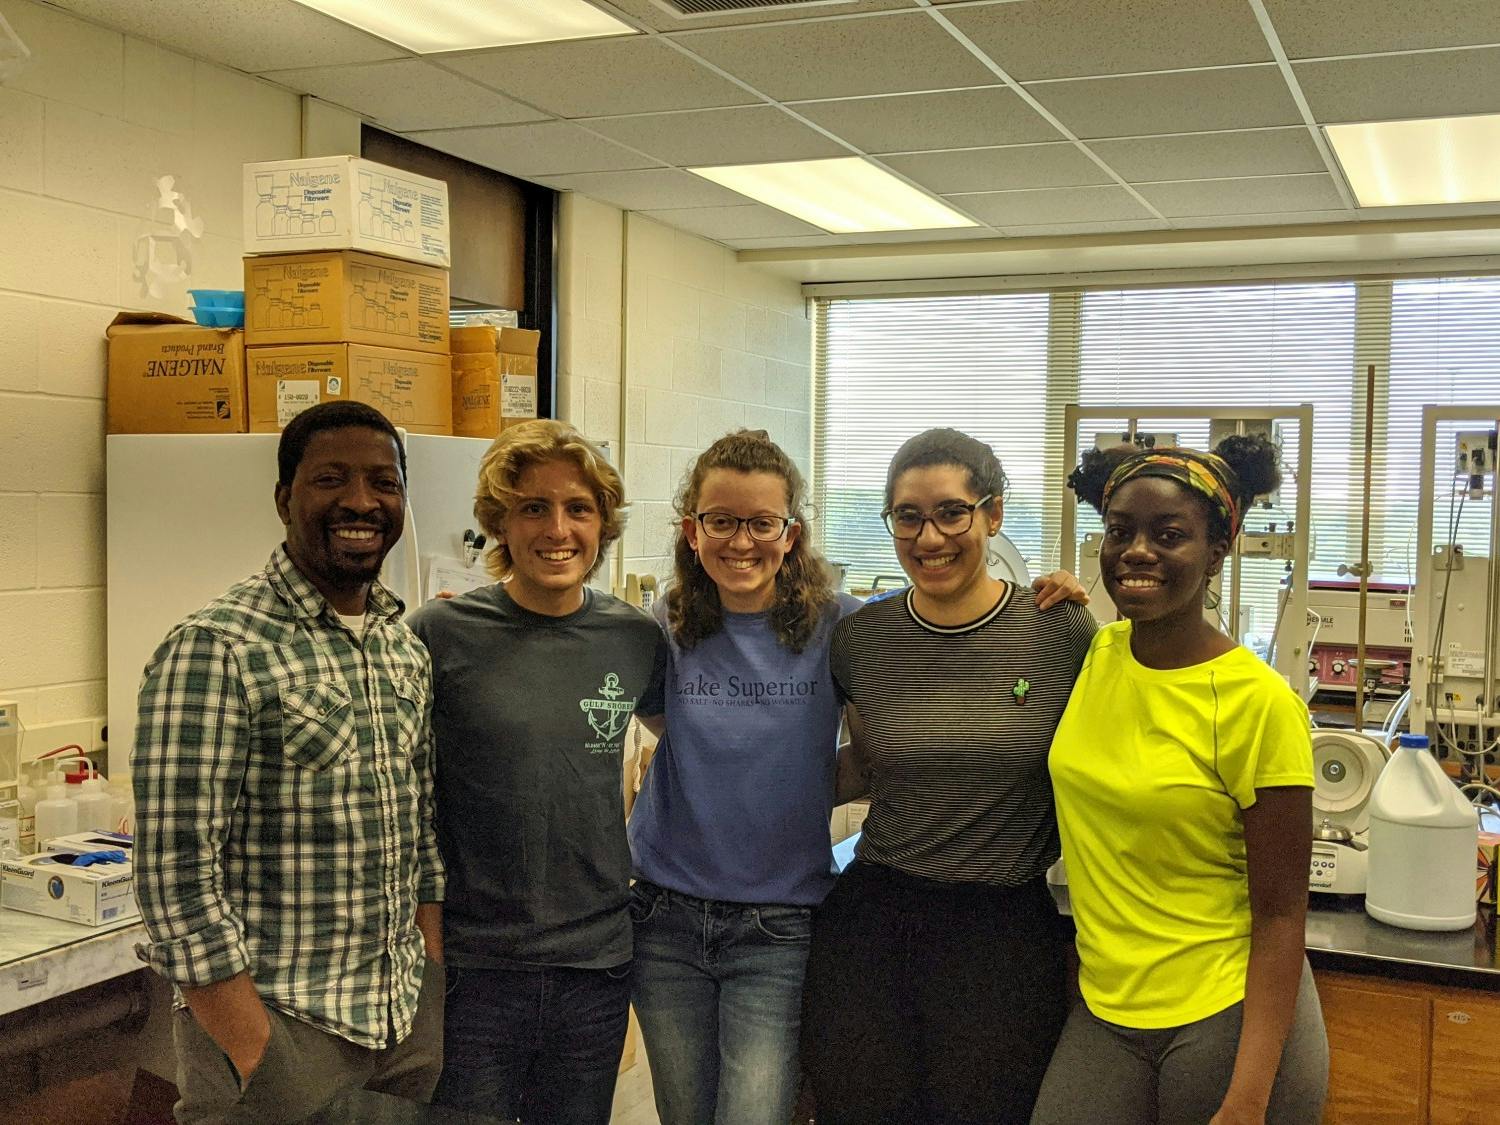 Daniel Kaluka, Alex Helmuth, Elaine Christian, Kendra Russell and Tia Watkins worked together this summer on campus.